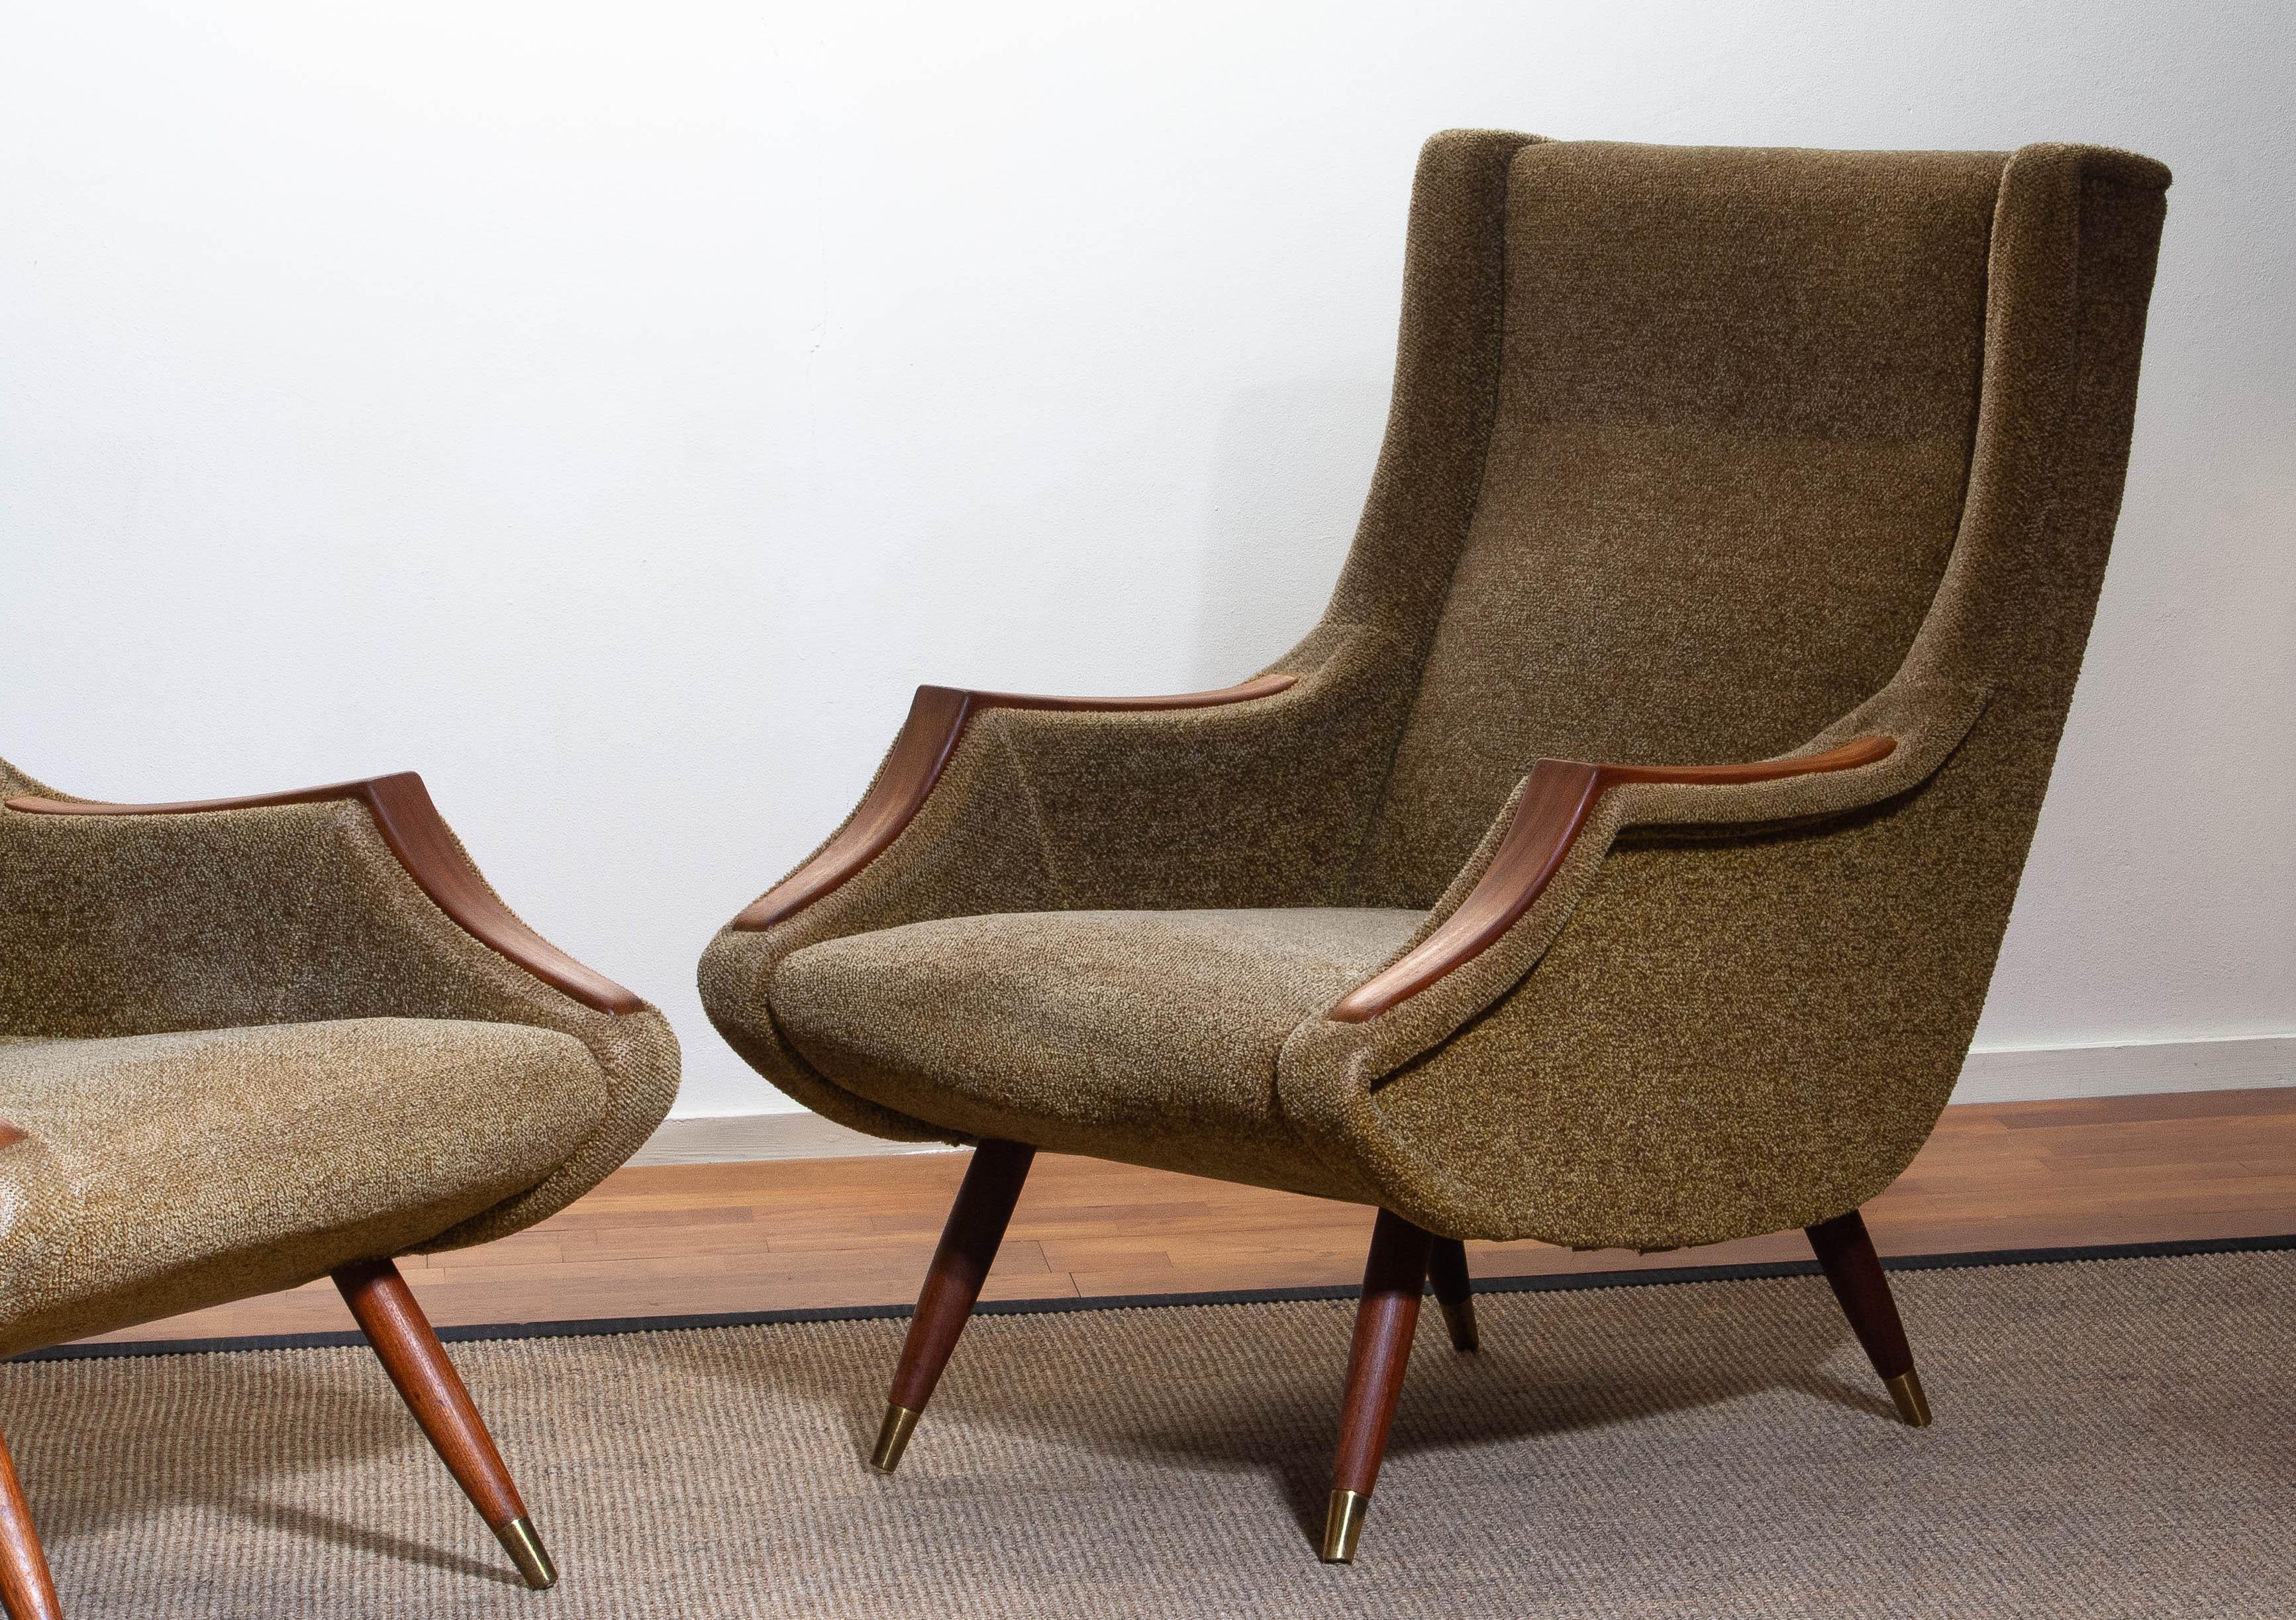 Mid-Century Modern Set Italian Lounge / Easy Chairs from the 1950s by Aldo Morbelli for Isa Bergamo